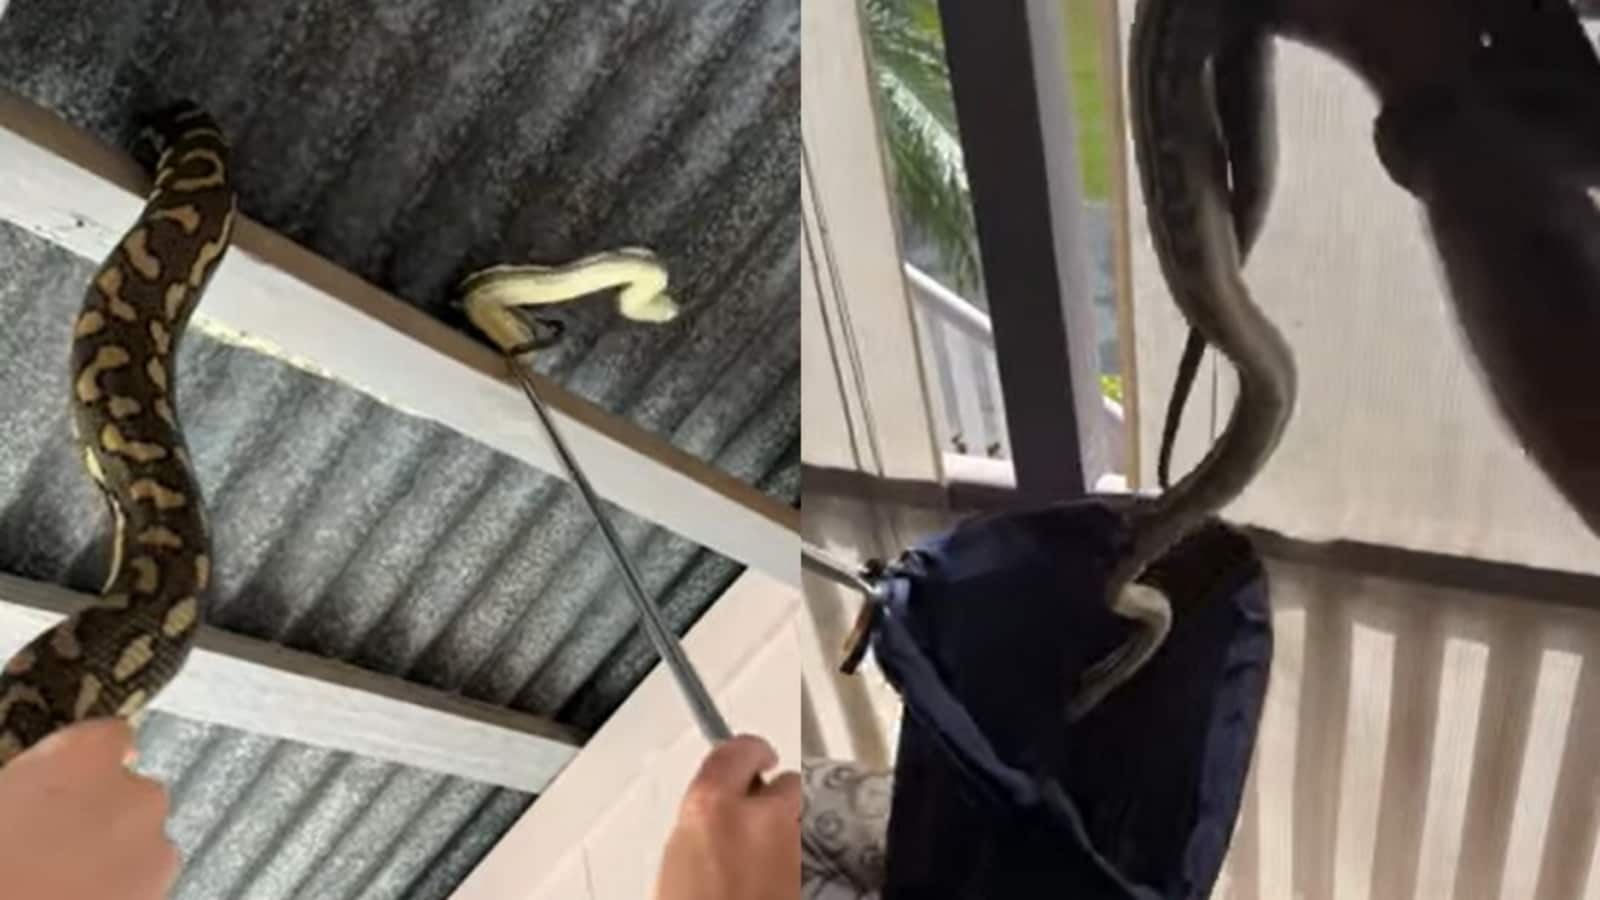 Monstrous python 'waits' for woman at her front door. Watch how it was rescued